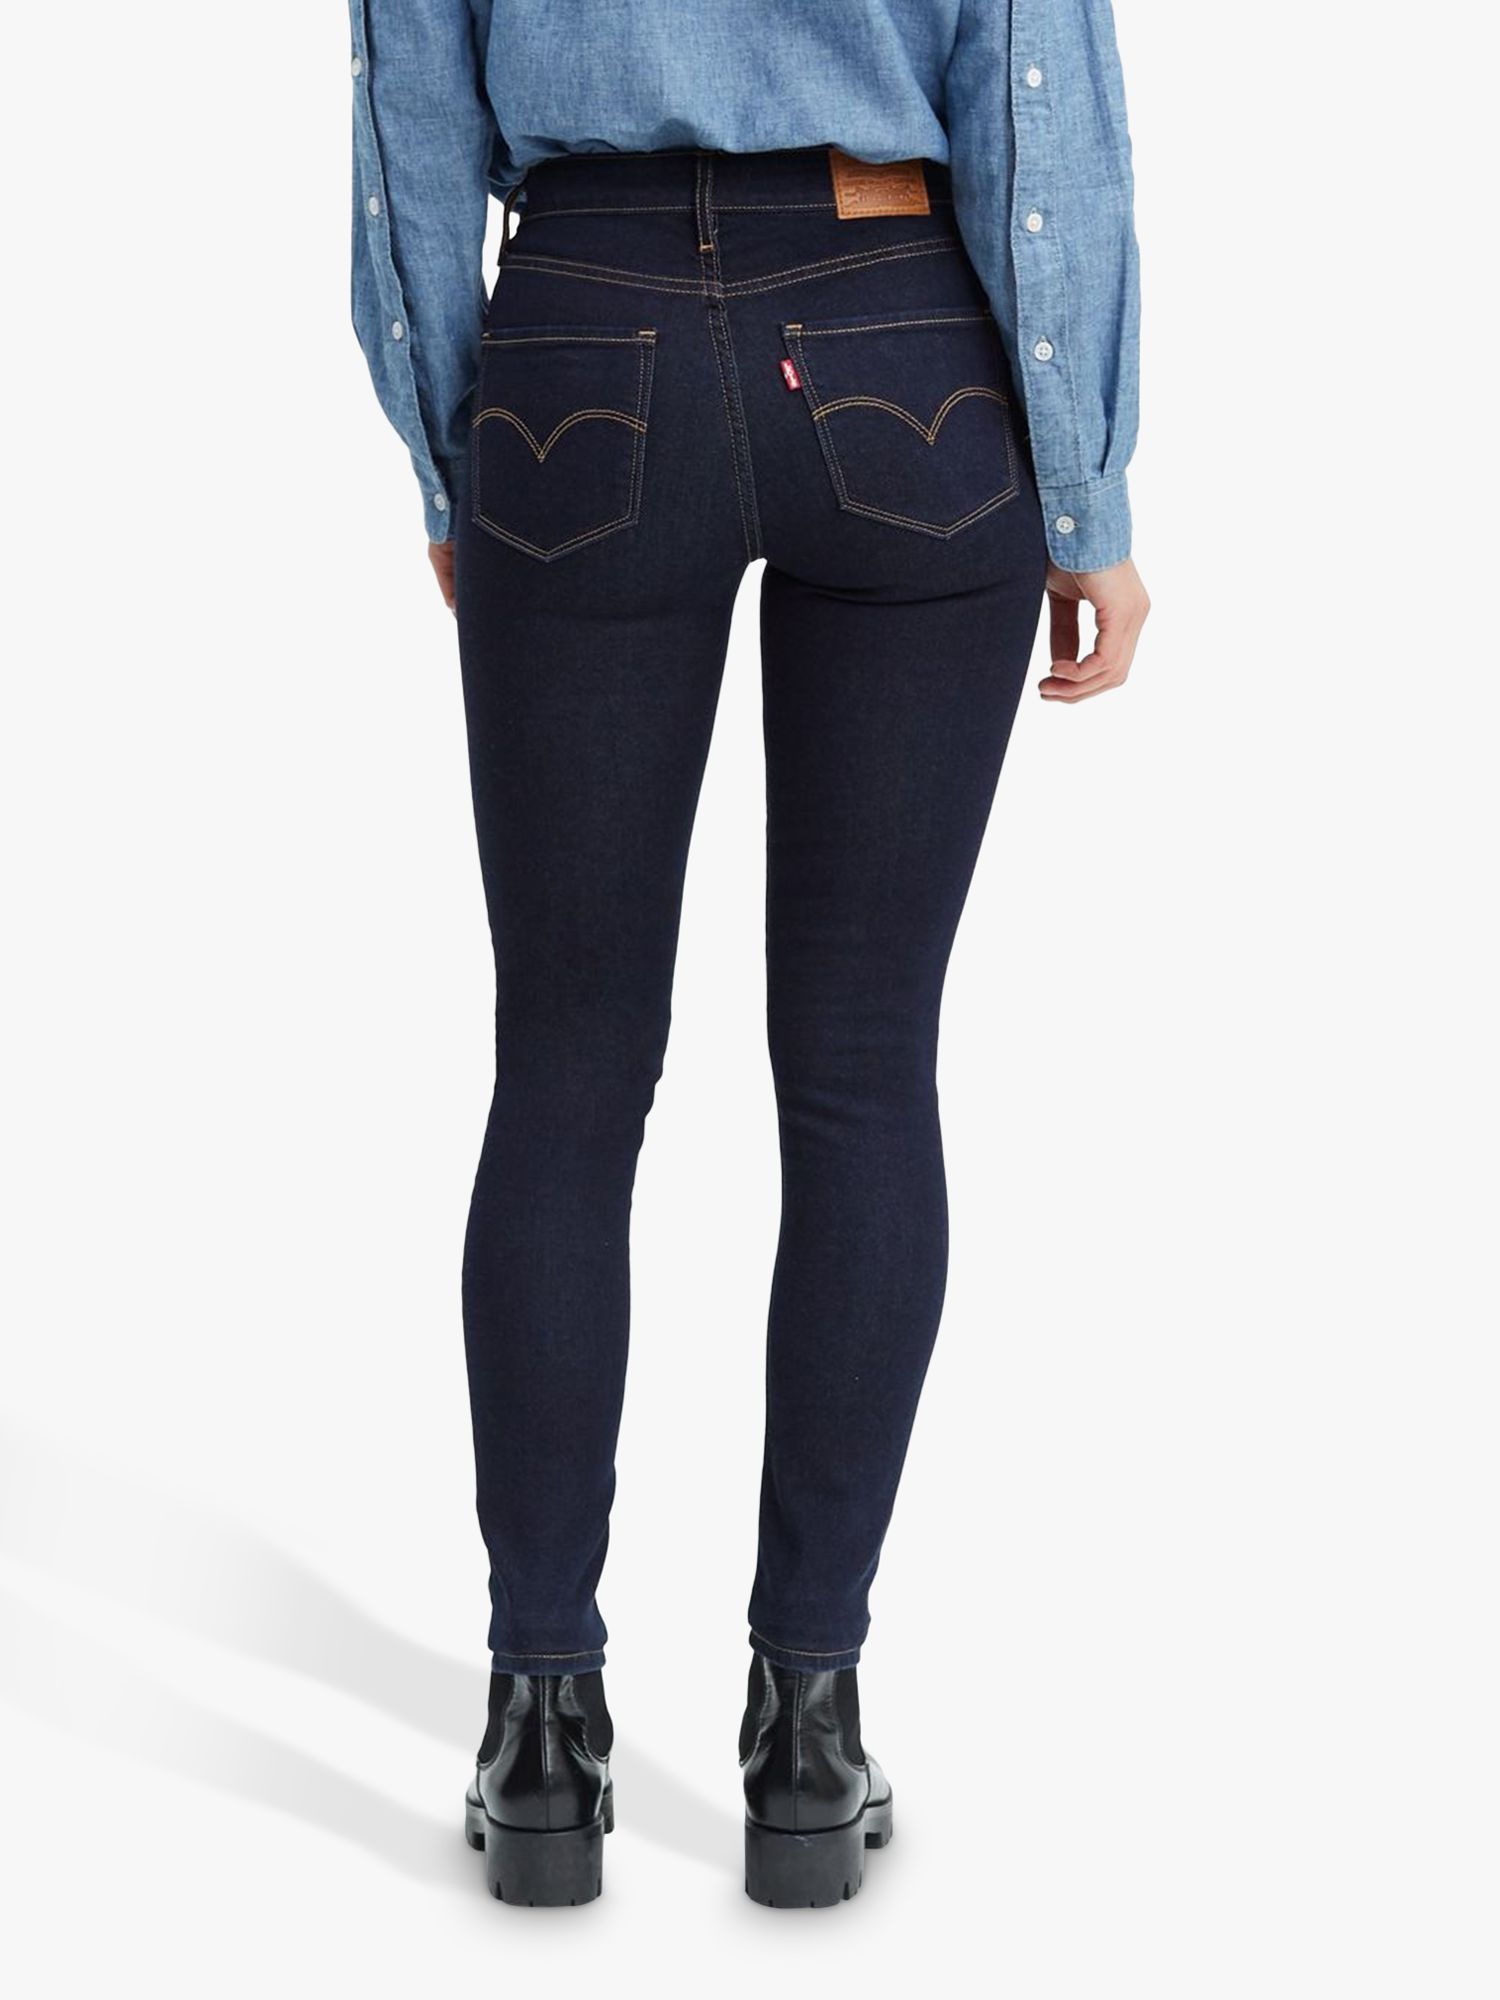 Levi's 721 High Rise Skinny Jeans, To The Nine, W27/L34